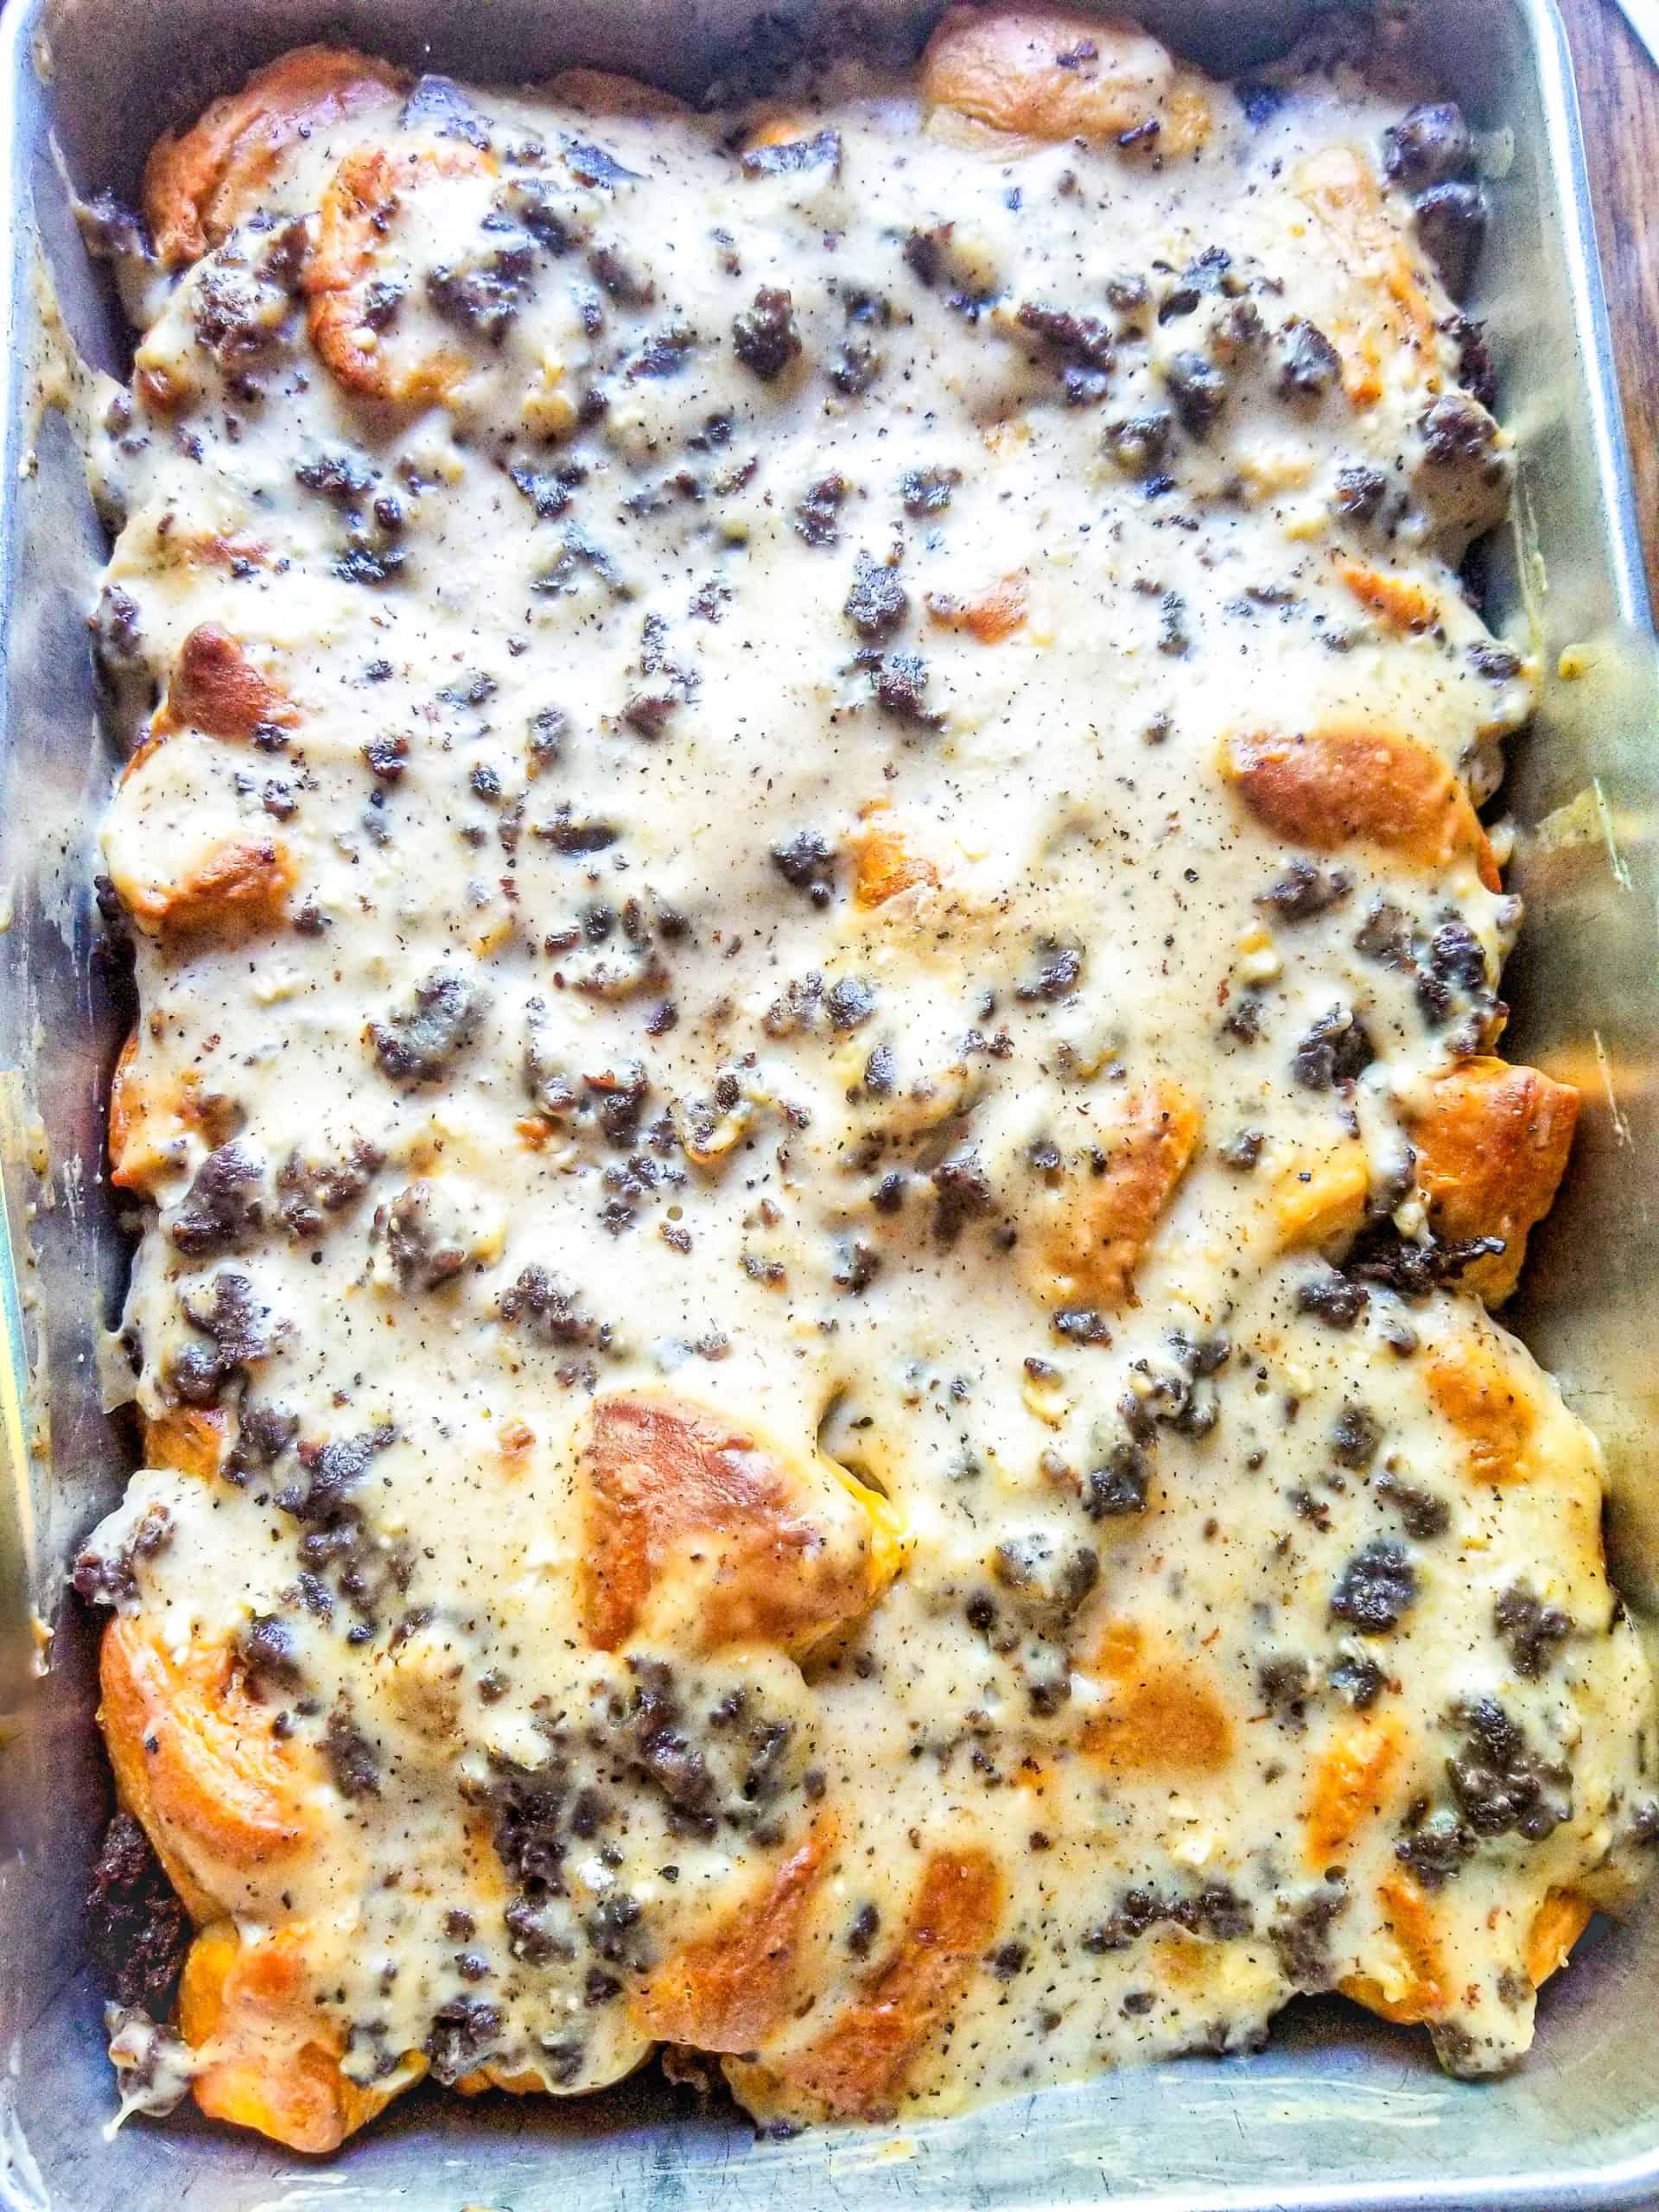 biscuits and gravy bake